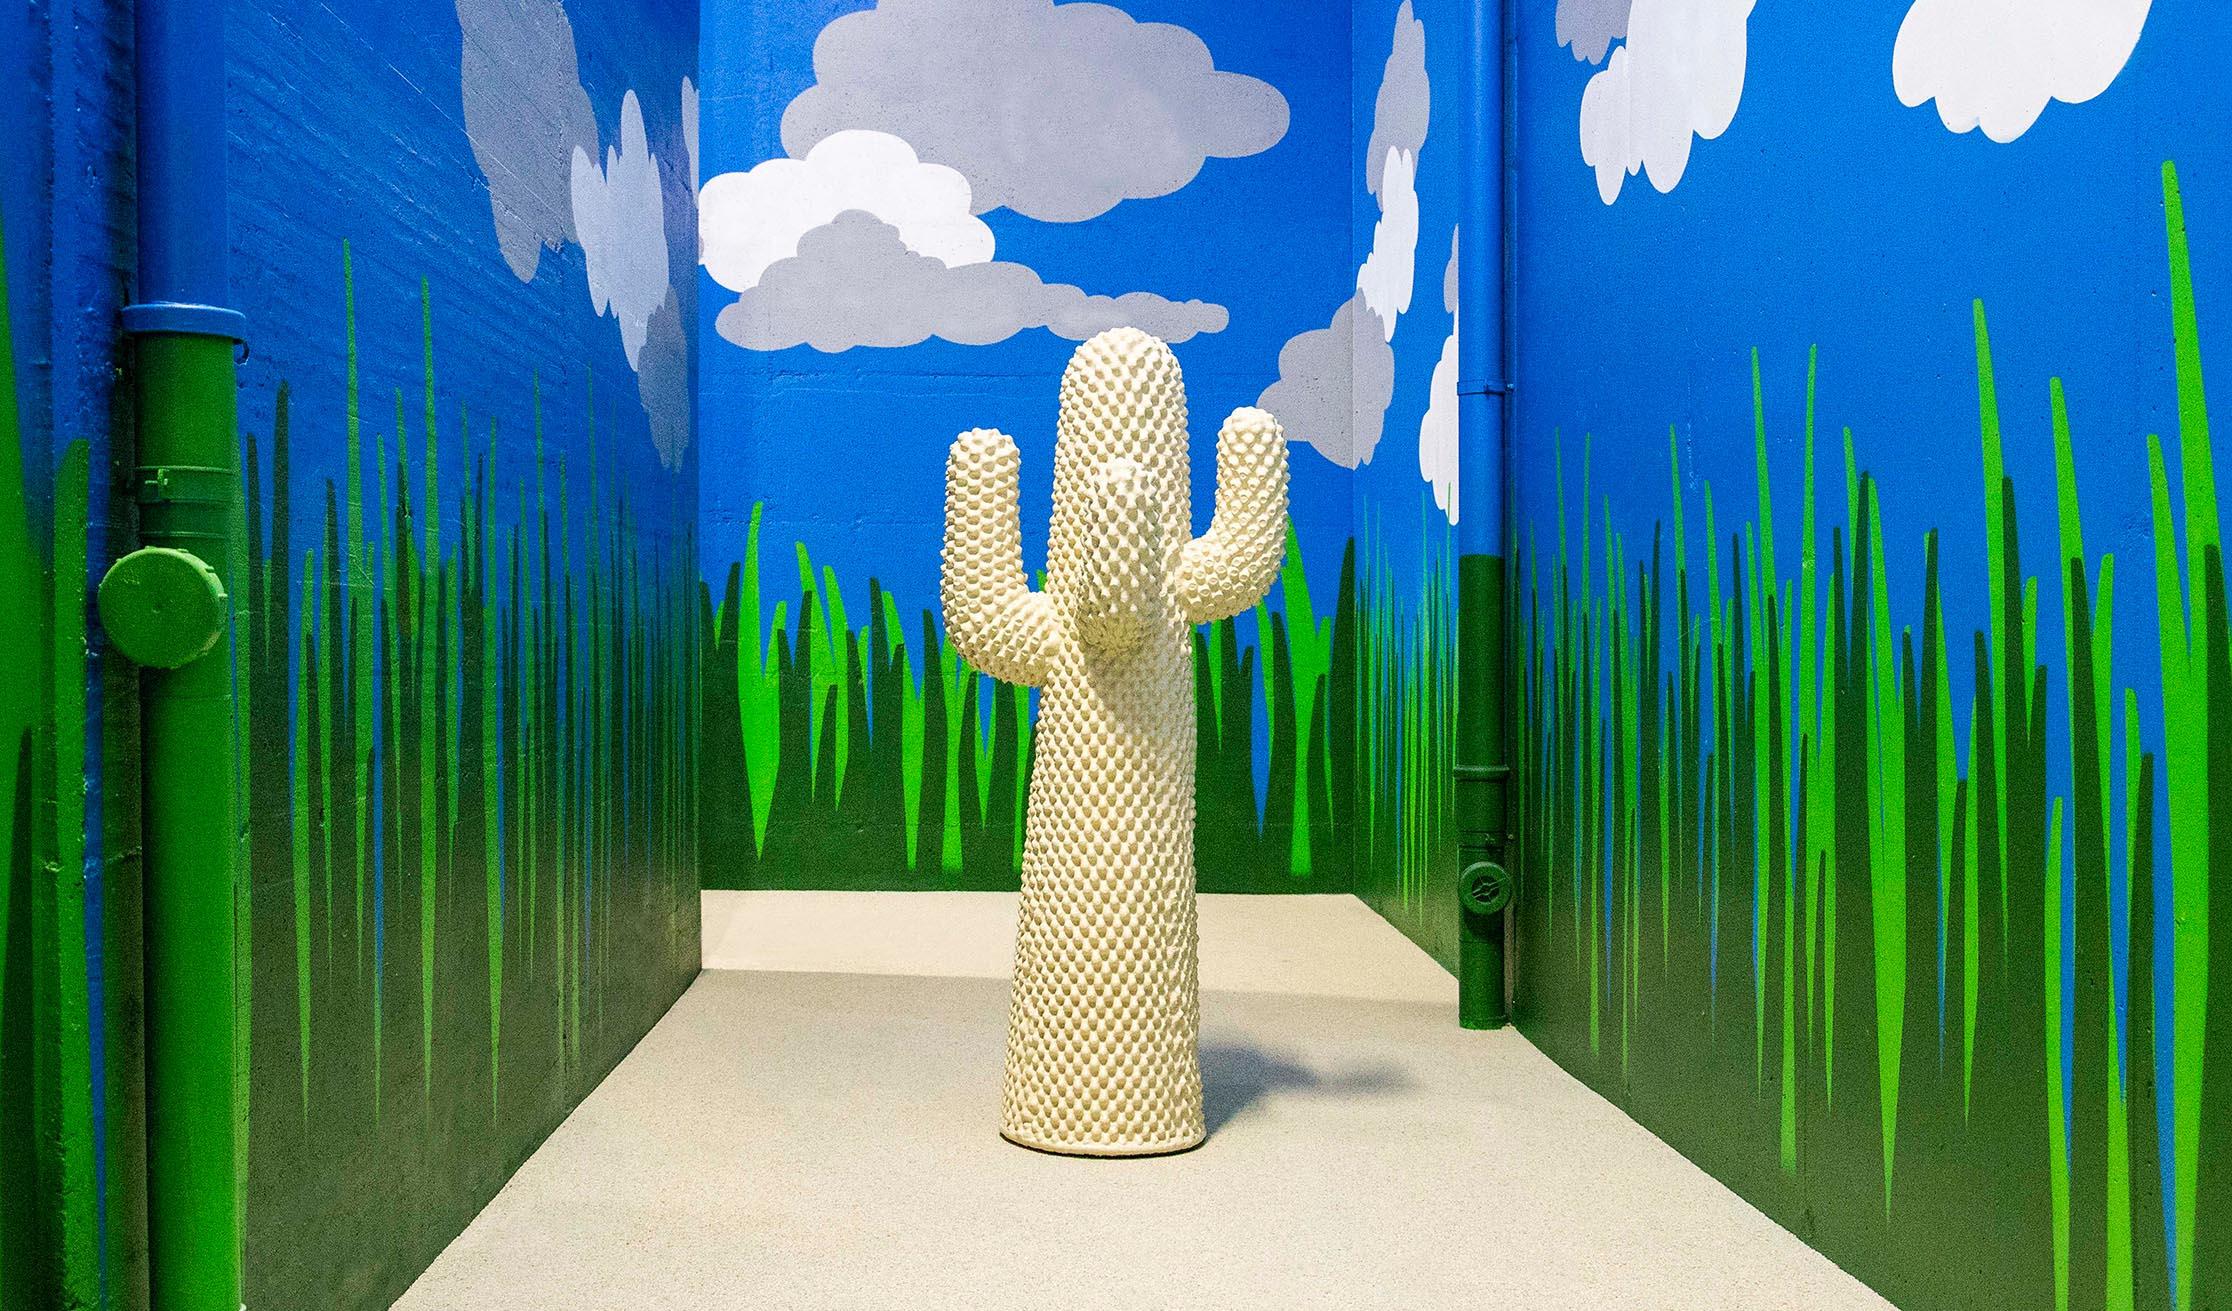 Organic Modern Another White Cactus - Coat Stand / Sculpture by Drocco/Mello for Gufram For Sale